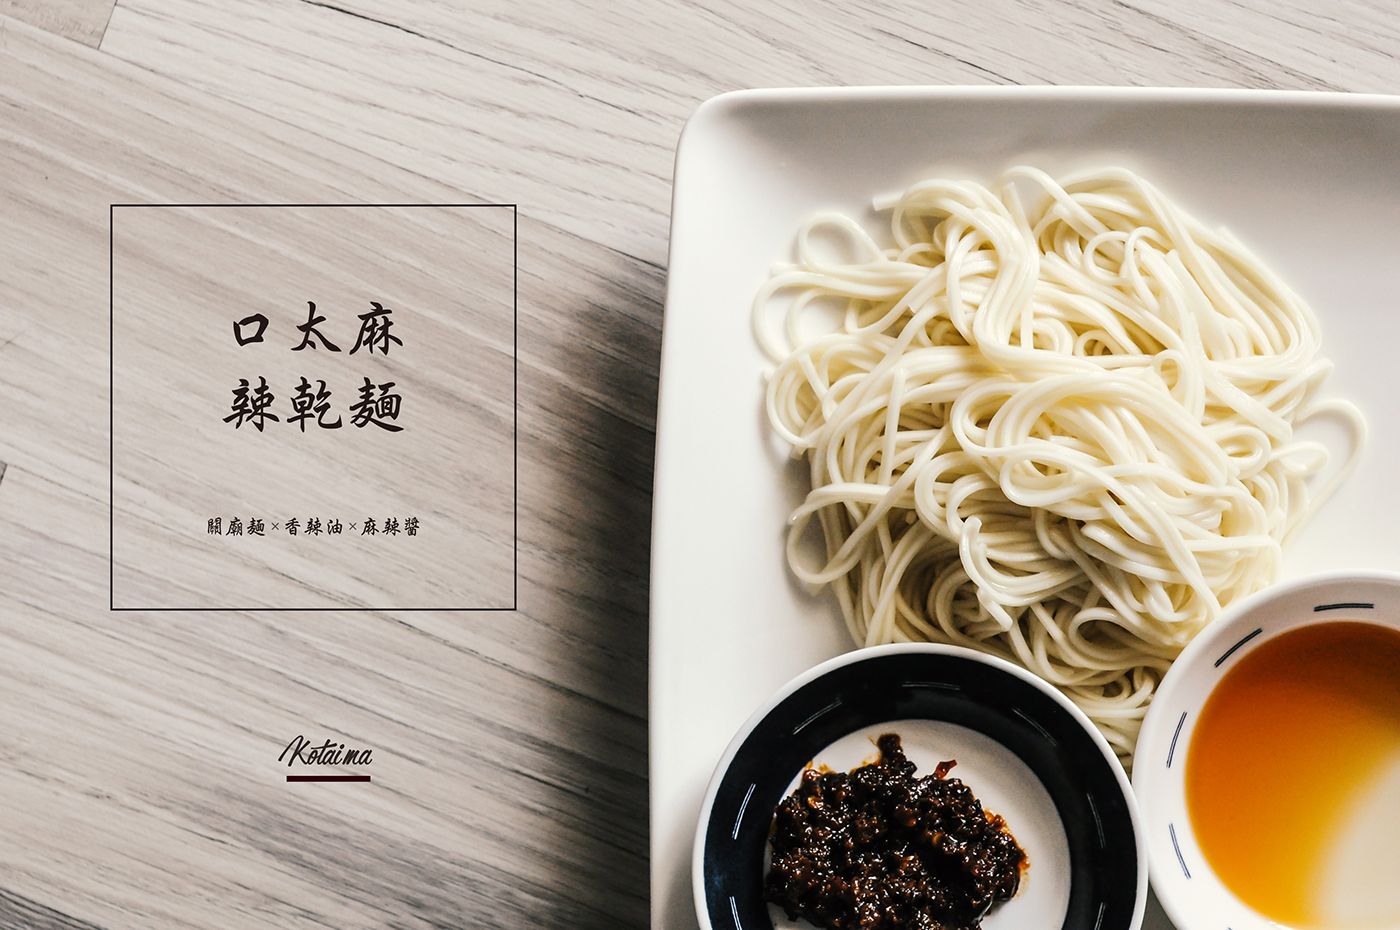 Food  design logo package photo advert brand noodle spicy chinese